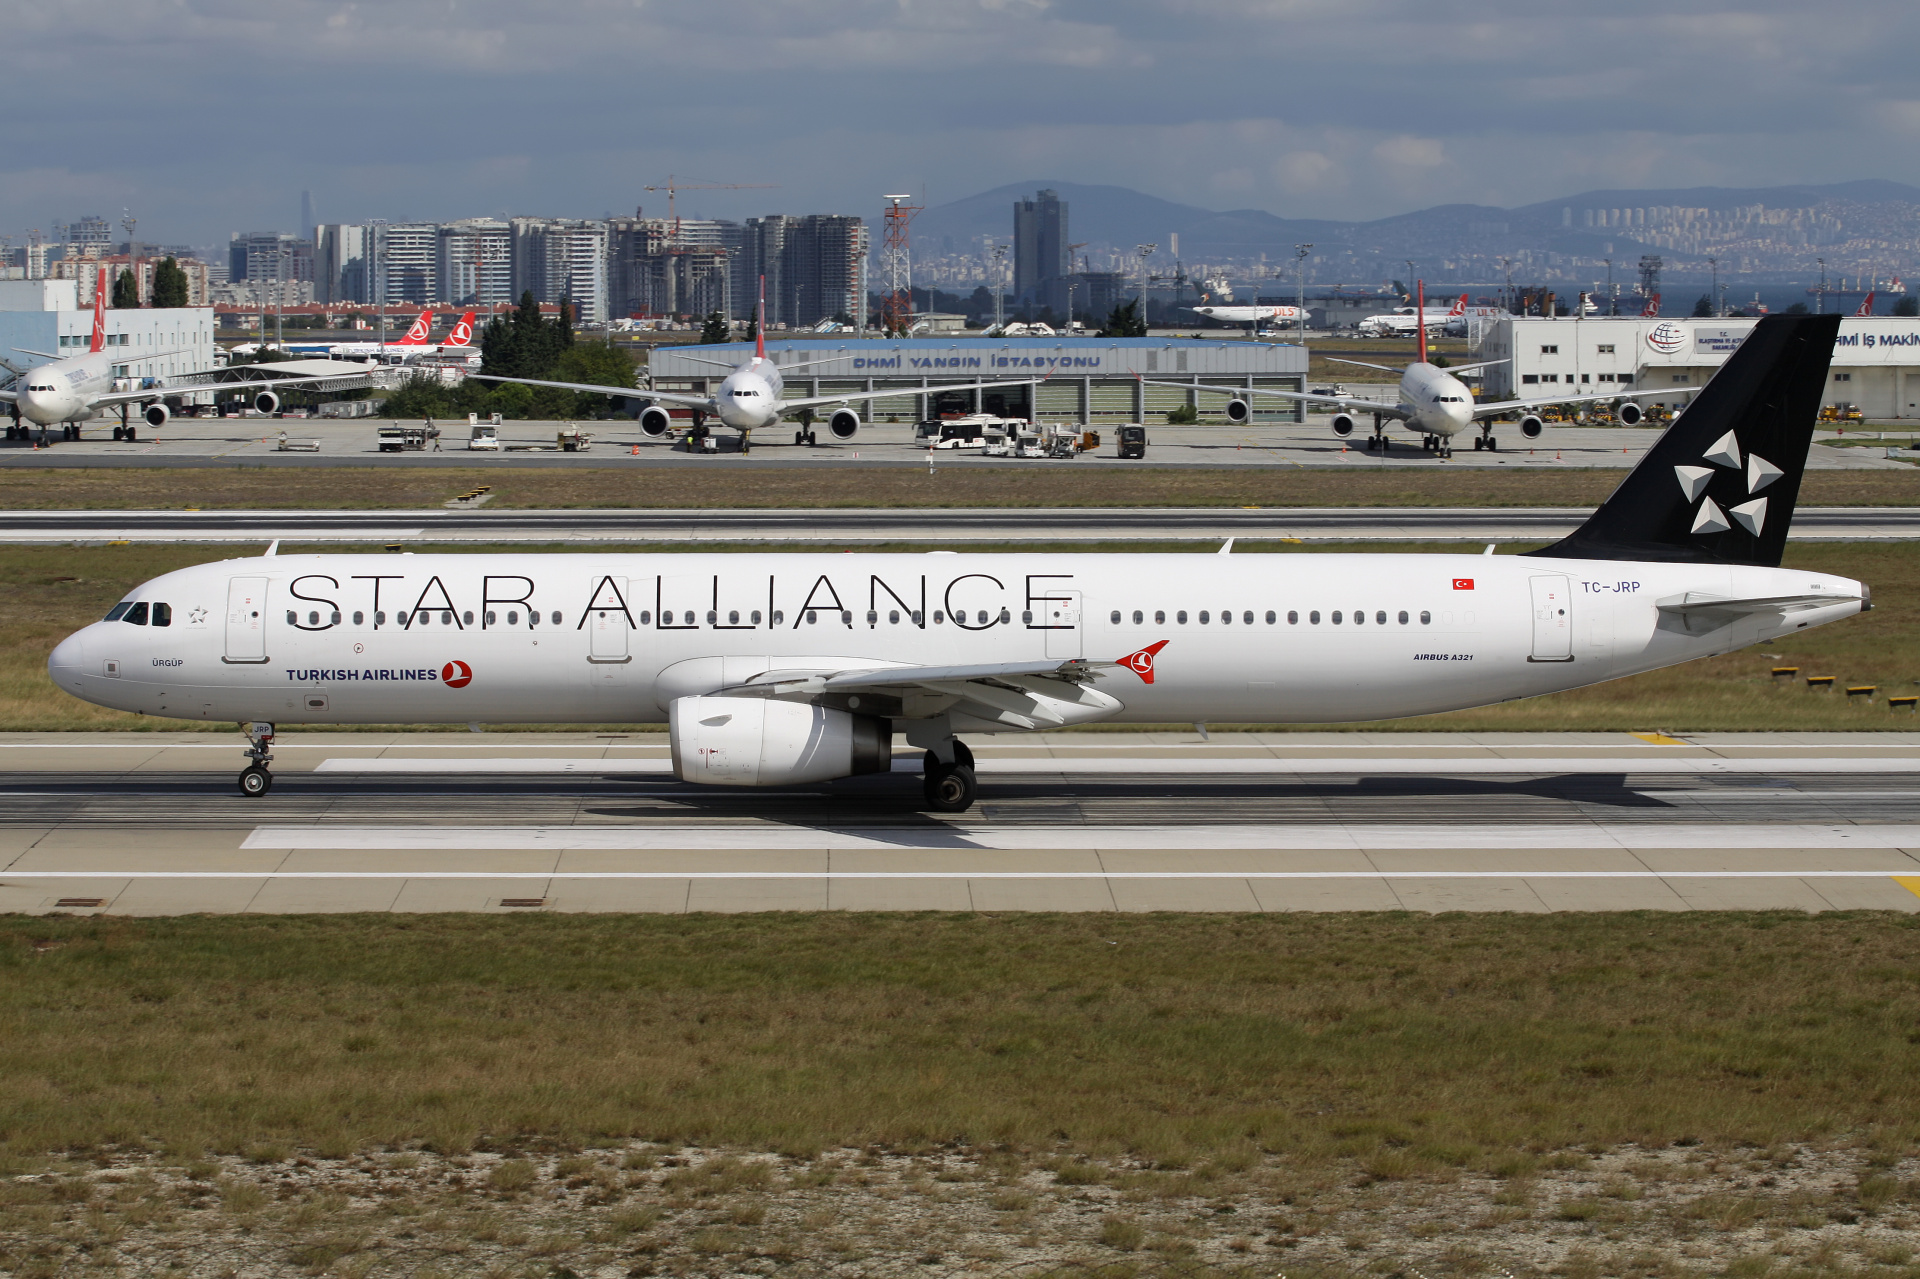 TC-JRP (Star Alliance livery) (Aircraft » Istanbul Atatürk Airport » Airbus A321-200 » THY Turkish Airlines)